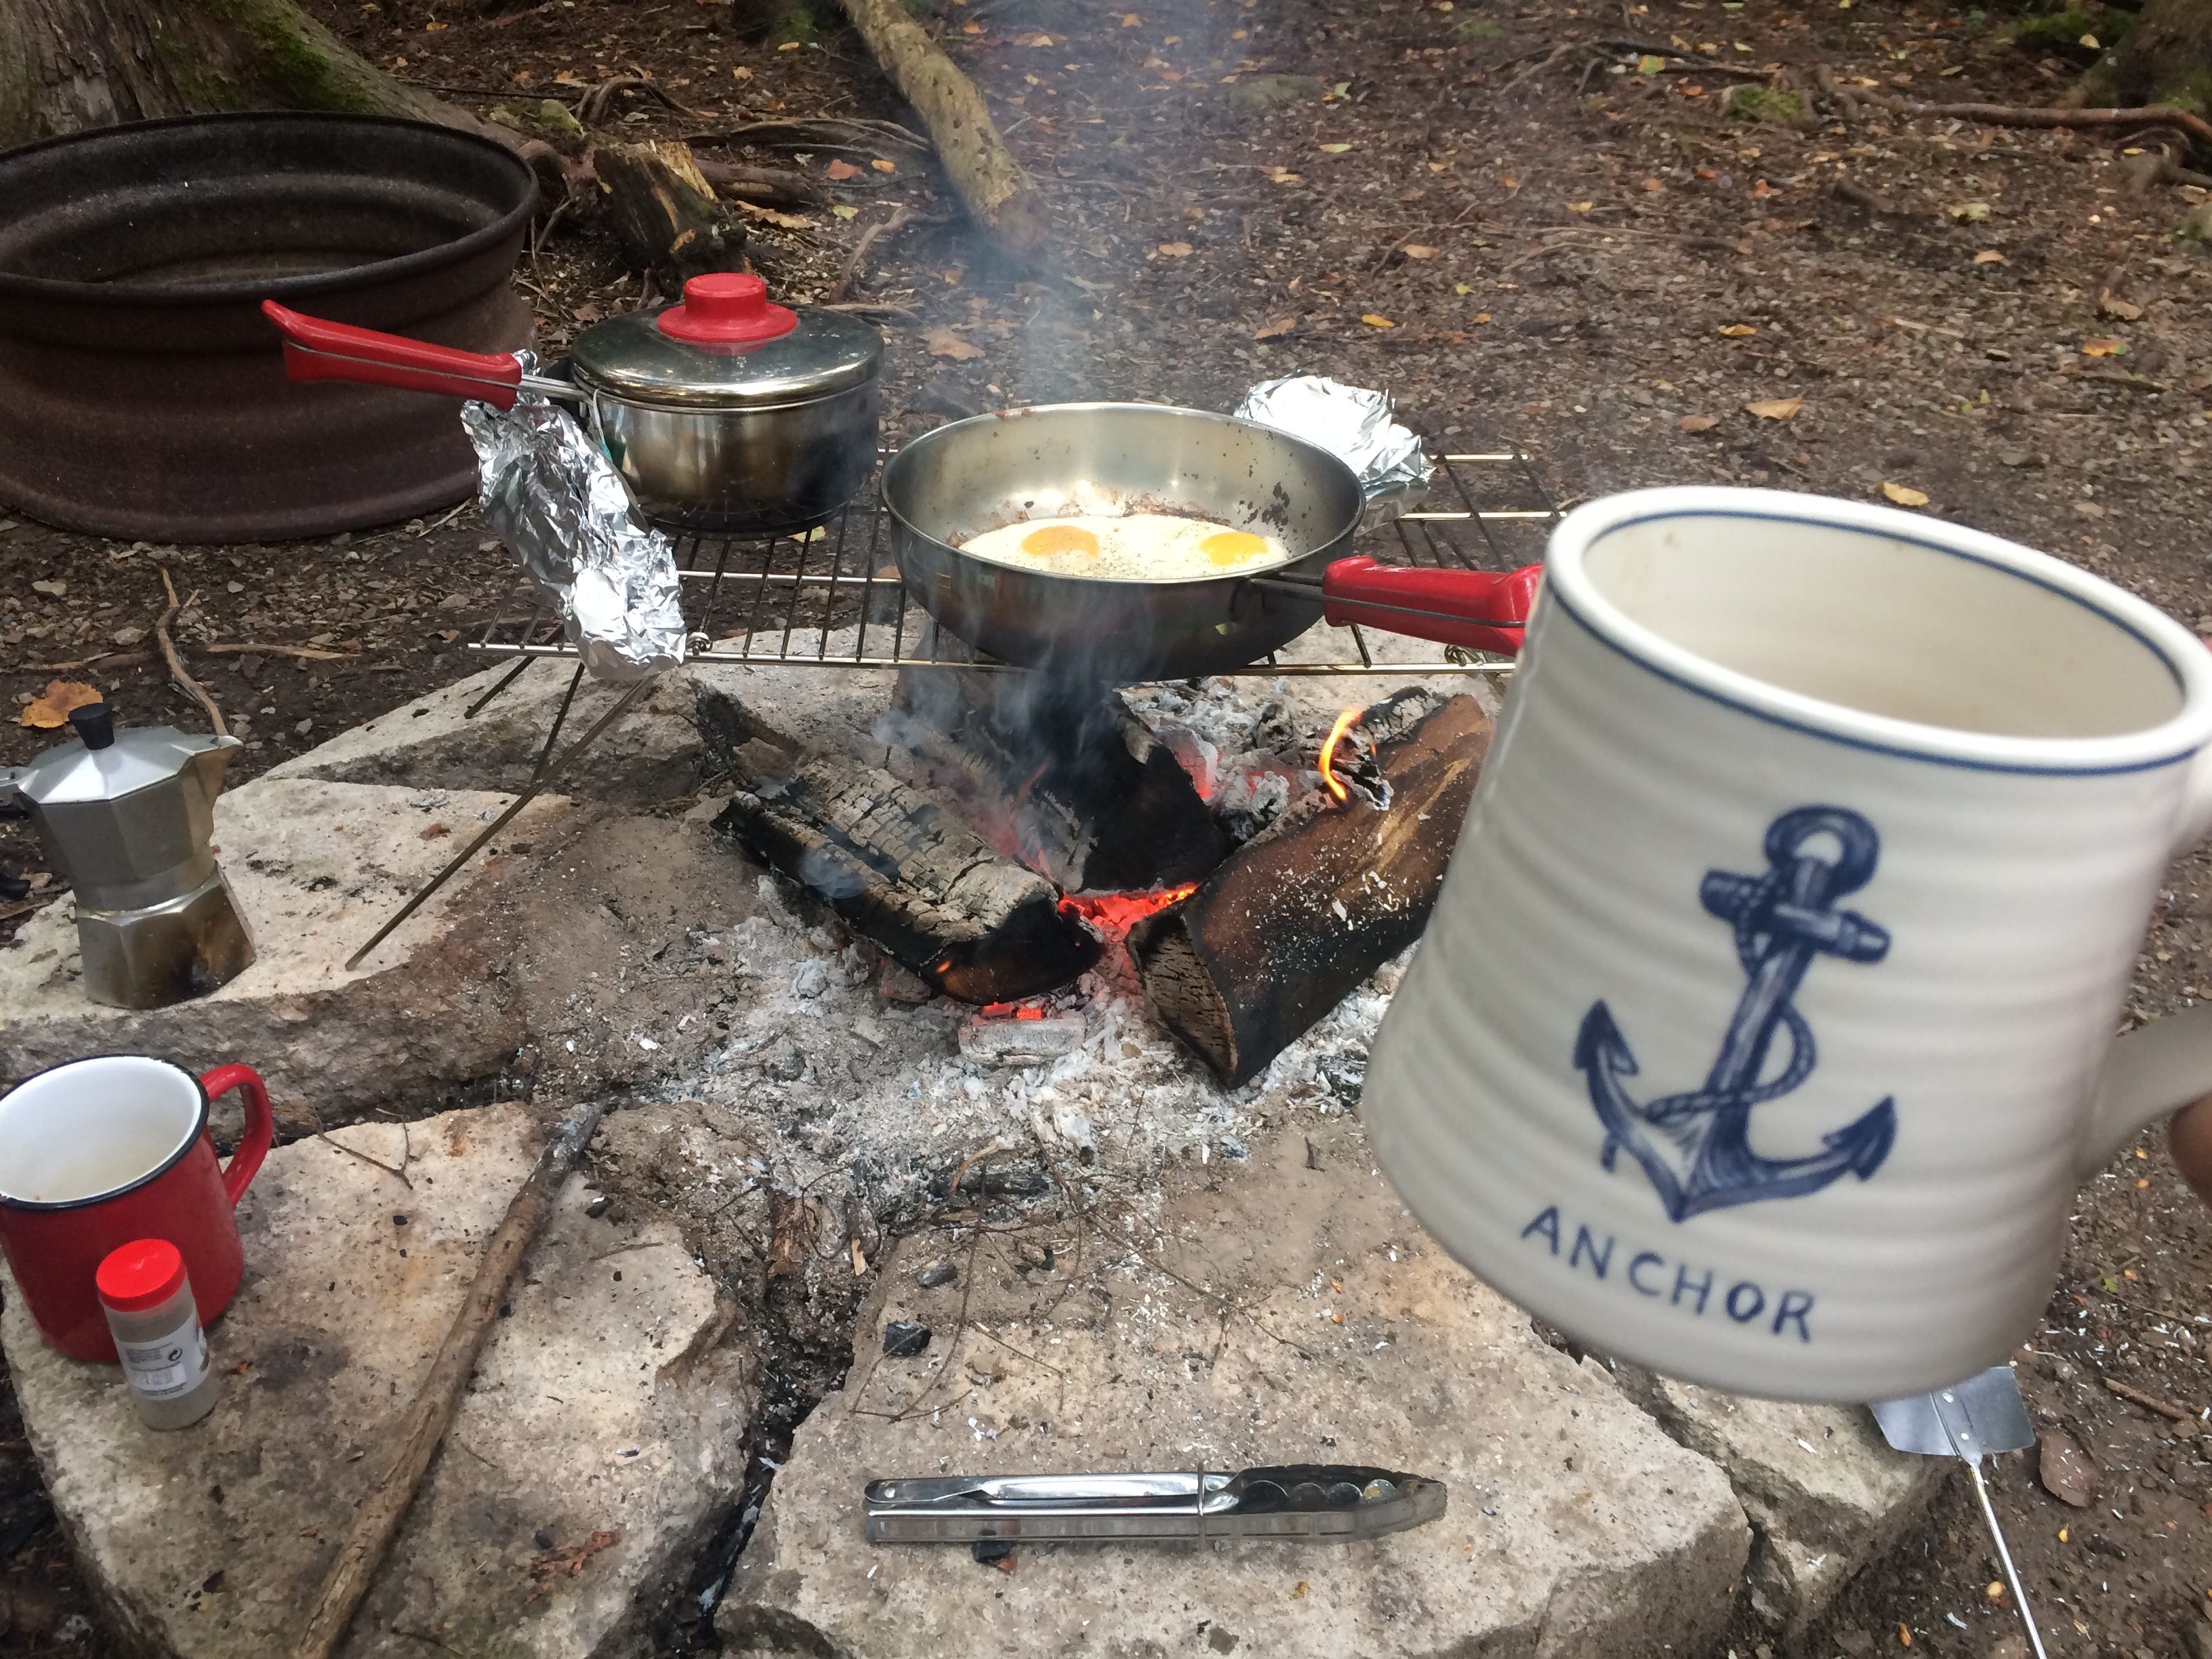 Throw in a campfire and a fancy mug, and your tea will taste even better